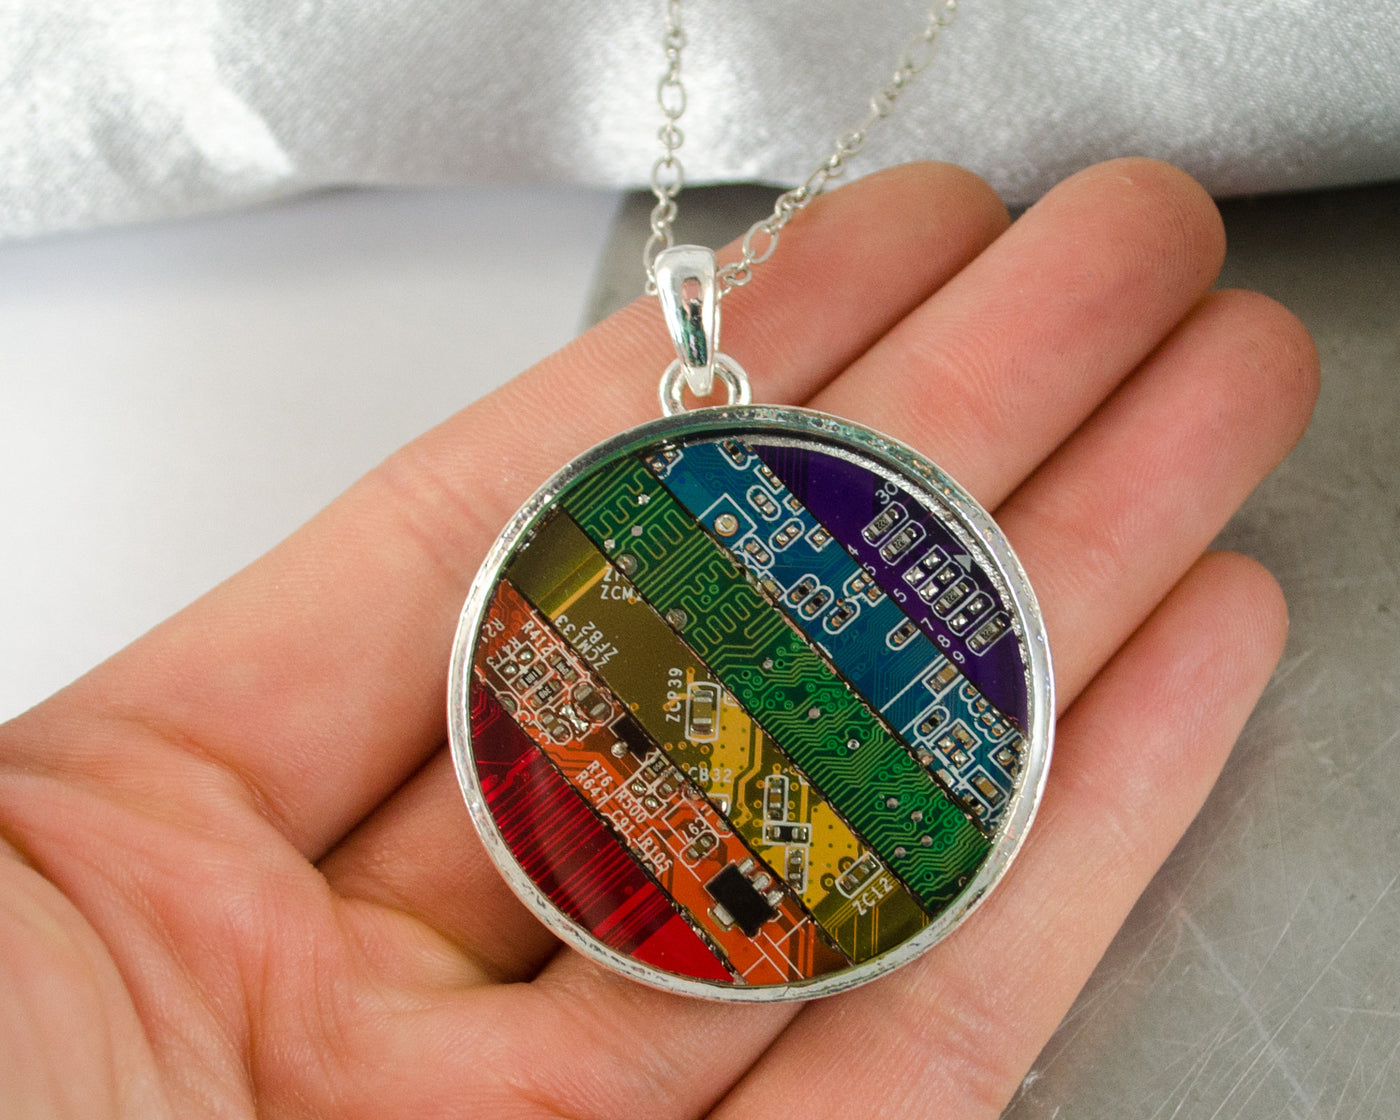 Giant Rainbow Circuit Board Necklace